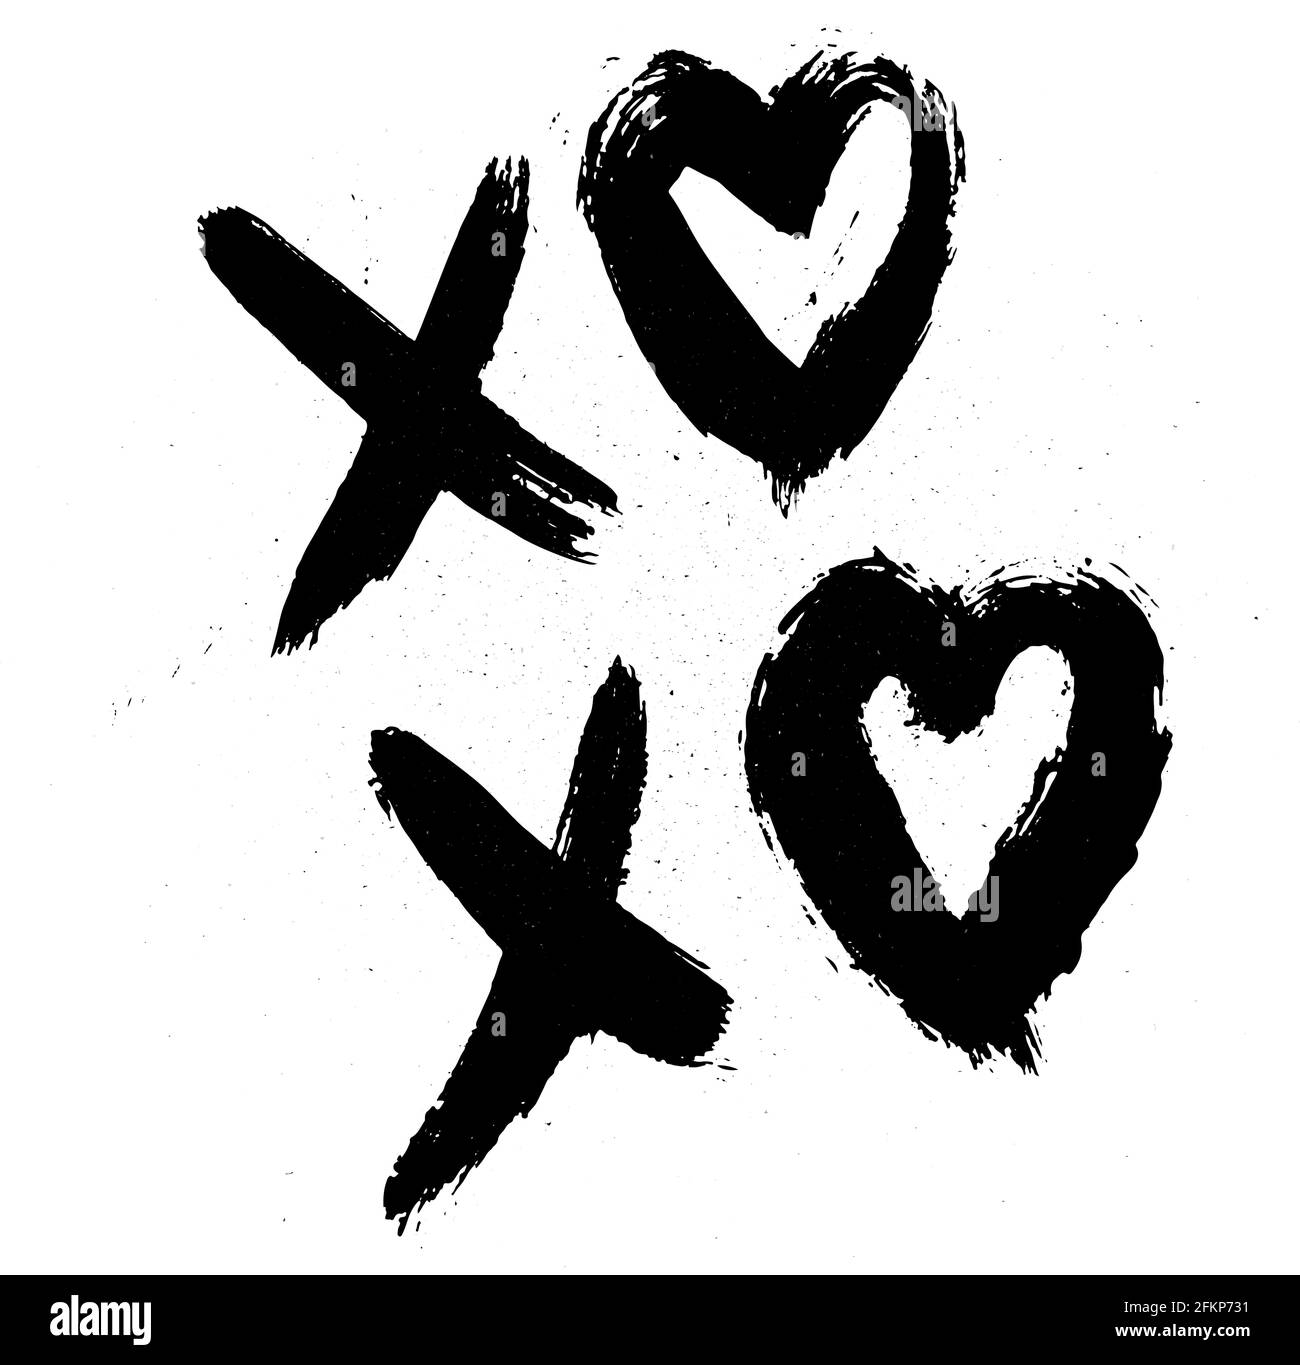 https://c8.alamy.com/comp/2FKP731/xoxo-hand-written-phrase-with-hearts-isolated-on-white-background-with-ink-spray-hugs-and-kisses-sign-grunge-brush-lettering-xo-easy-to-edit-templa-2FKP731.jpg